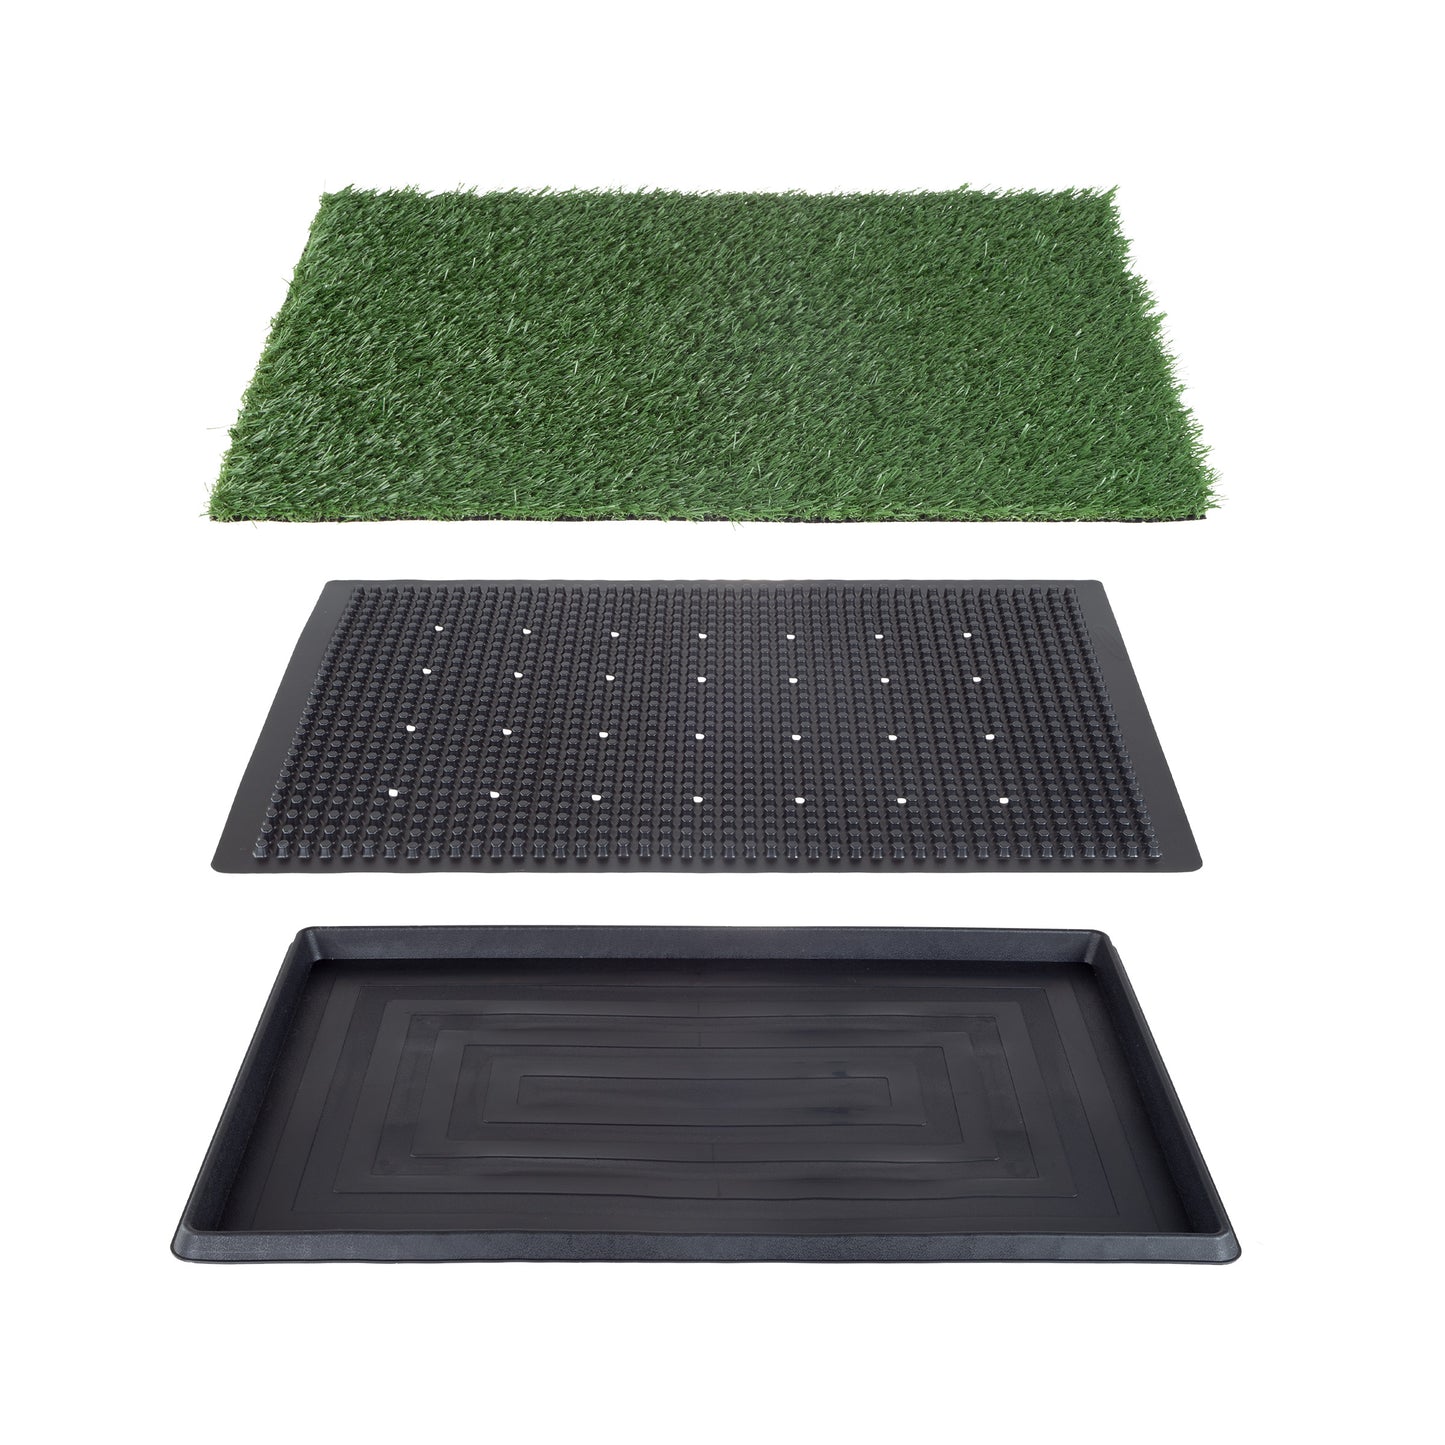 Reusable Grass Puppy Pad with Tray